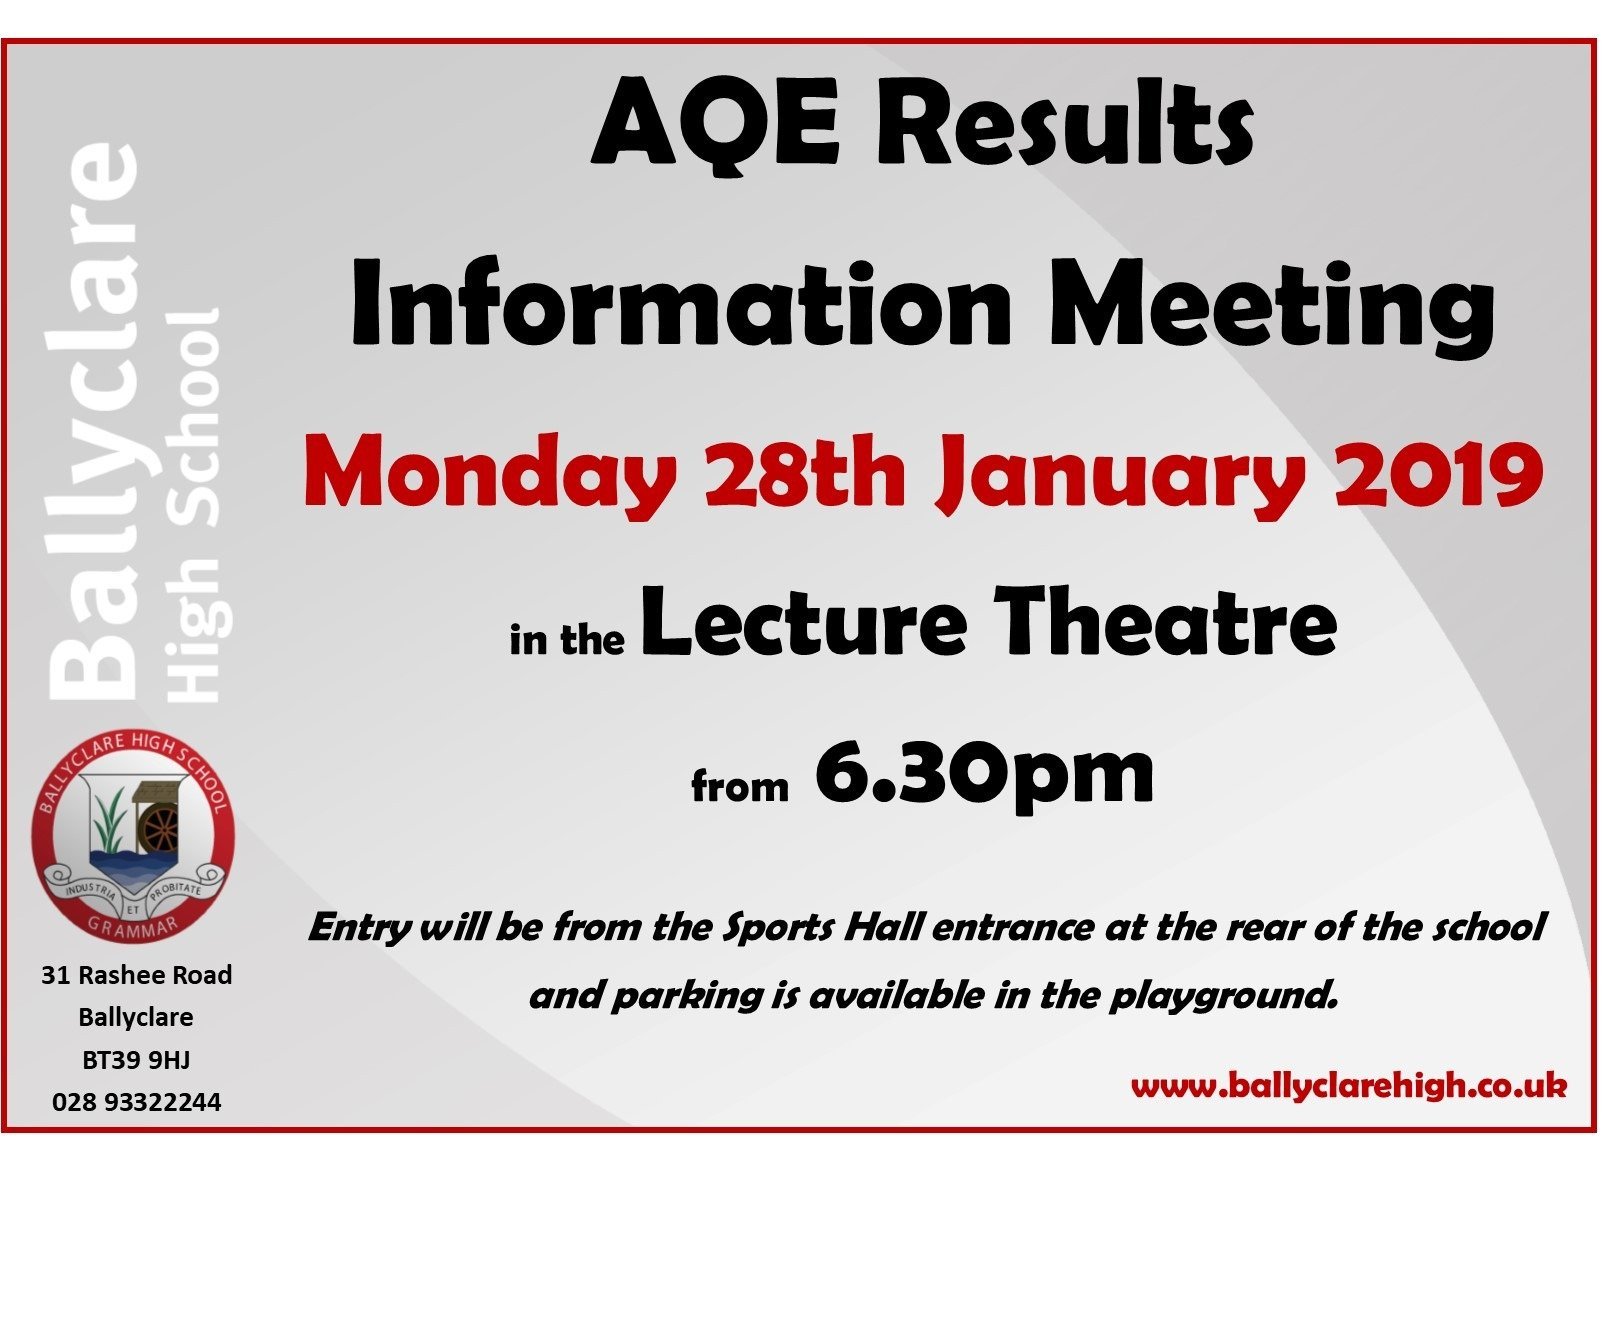 AQE Results Information Meeting Monday 28th January at 630pm